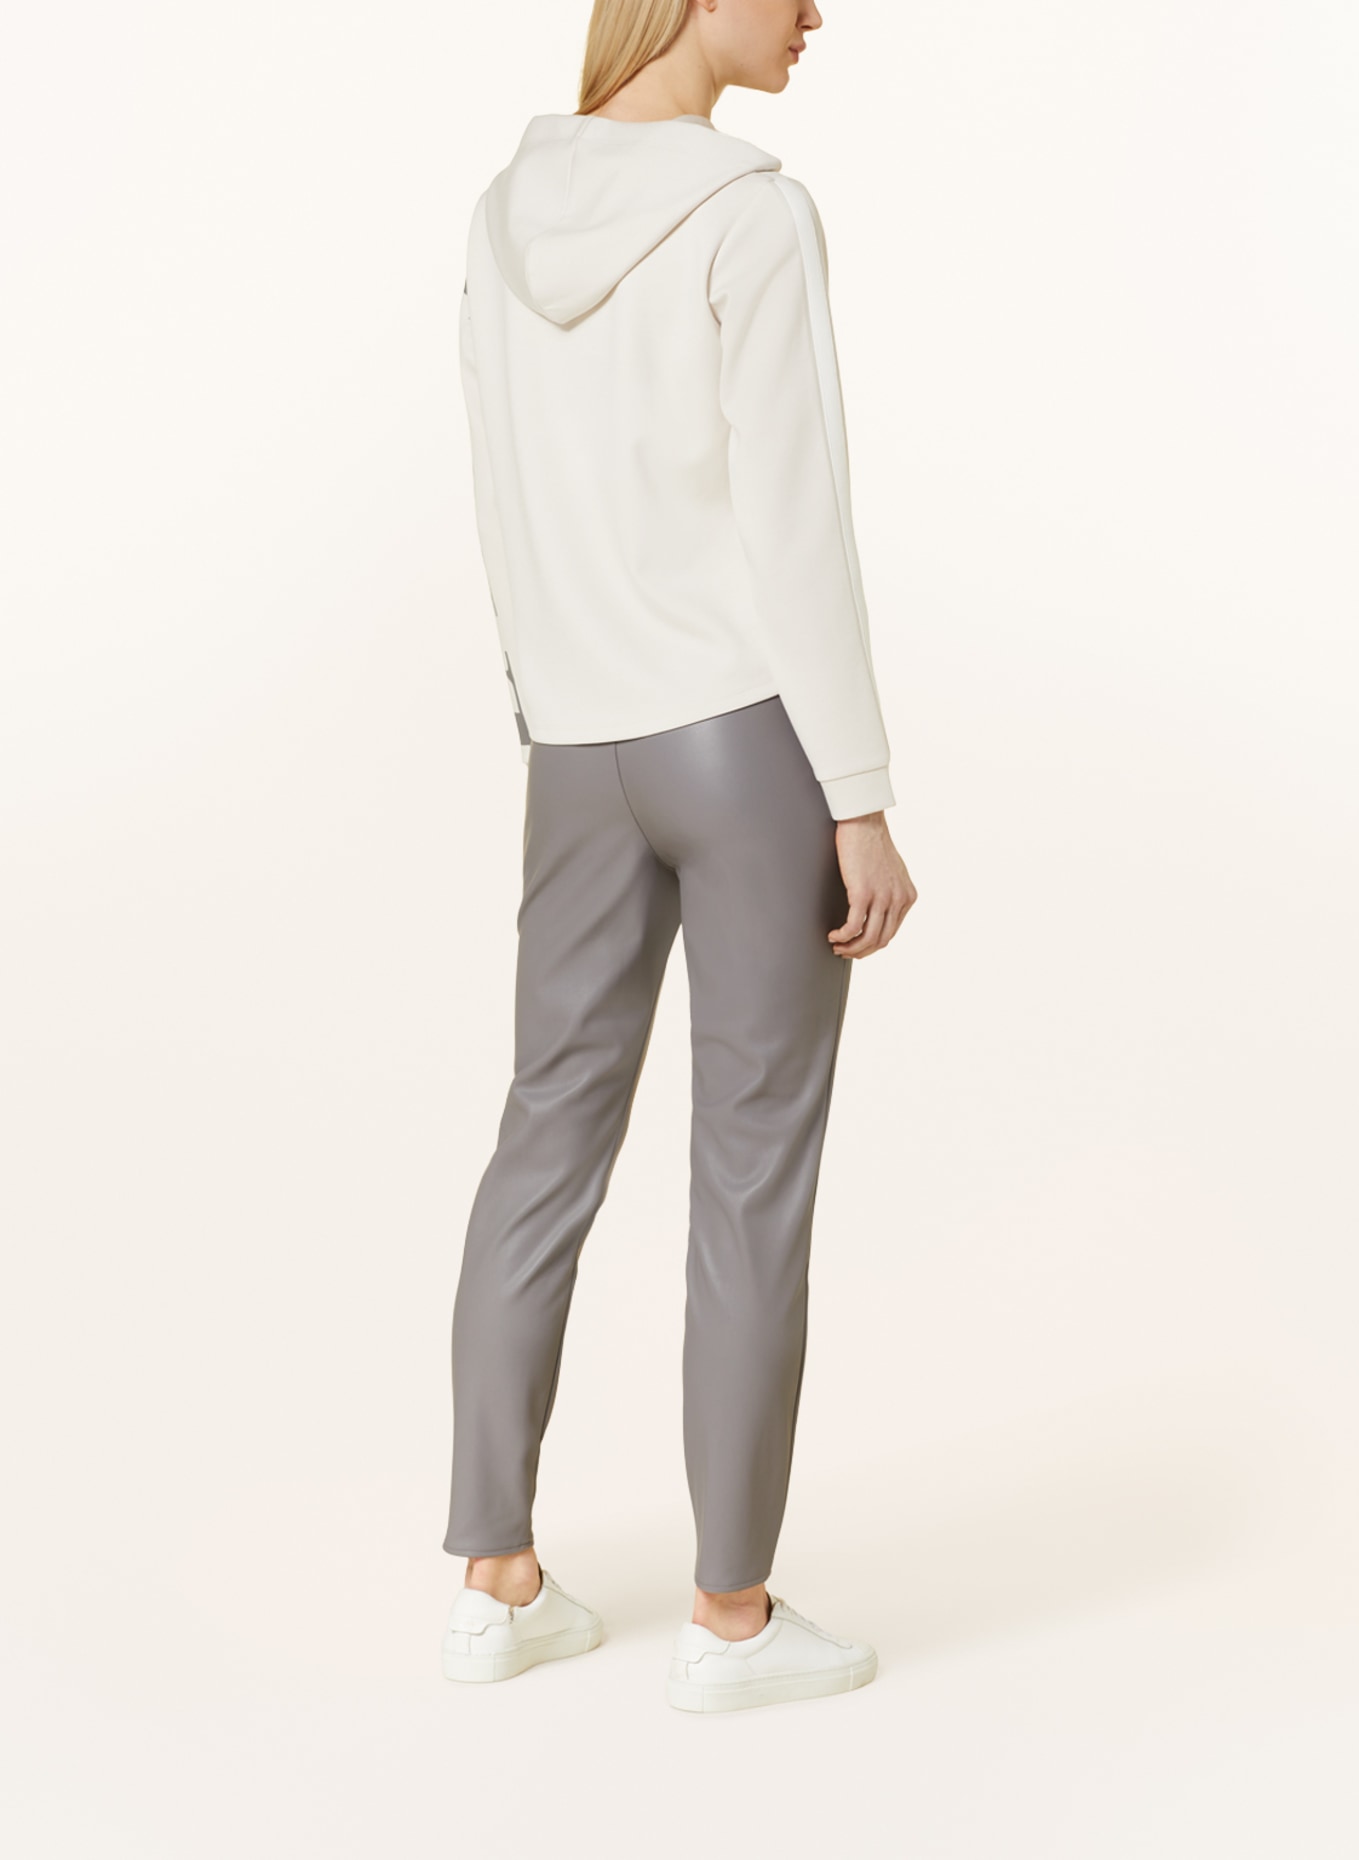 monari Pants in leather look, Color: GRAY (Image 3)